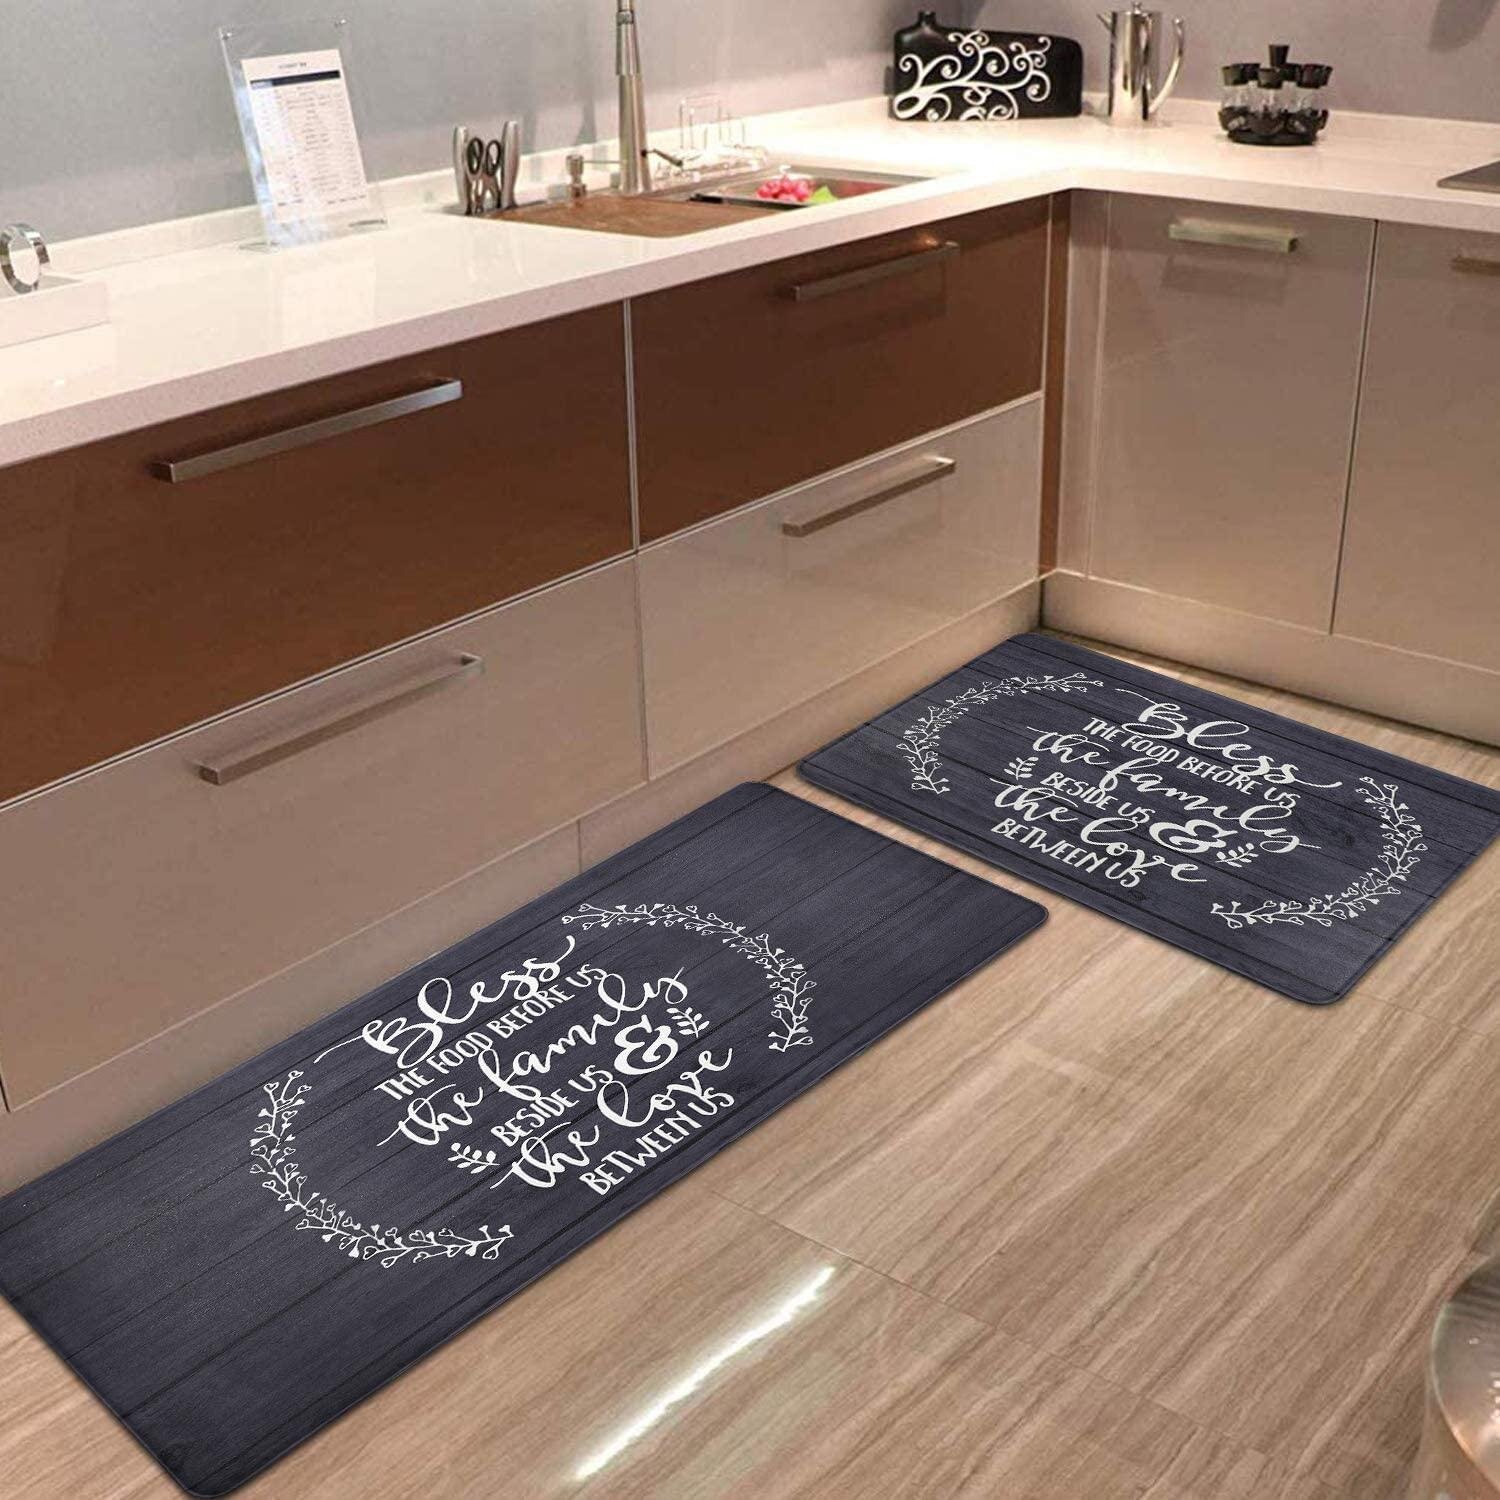 Kitchen Rugs Set of 2,Valentine's Day High Heels Kitchen Mats Rugs Non Skid Washable Anti Fatiguee,FarmhouseWoman Shoes Water Absorption Doormat Carpet for Bedroom/Bathroom/Living Room